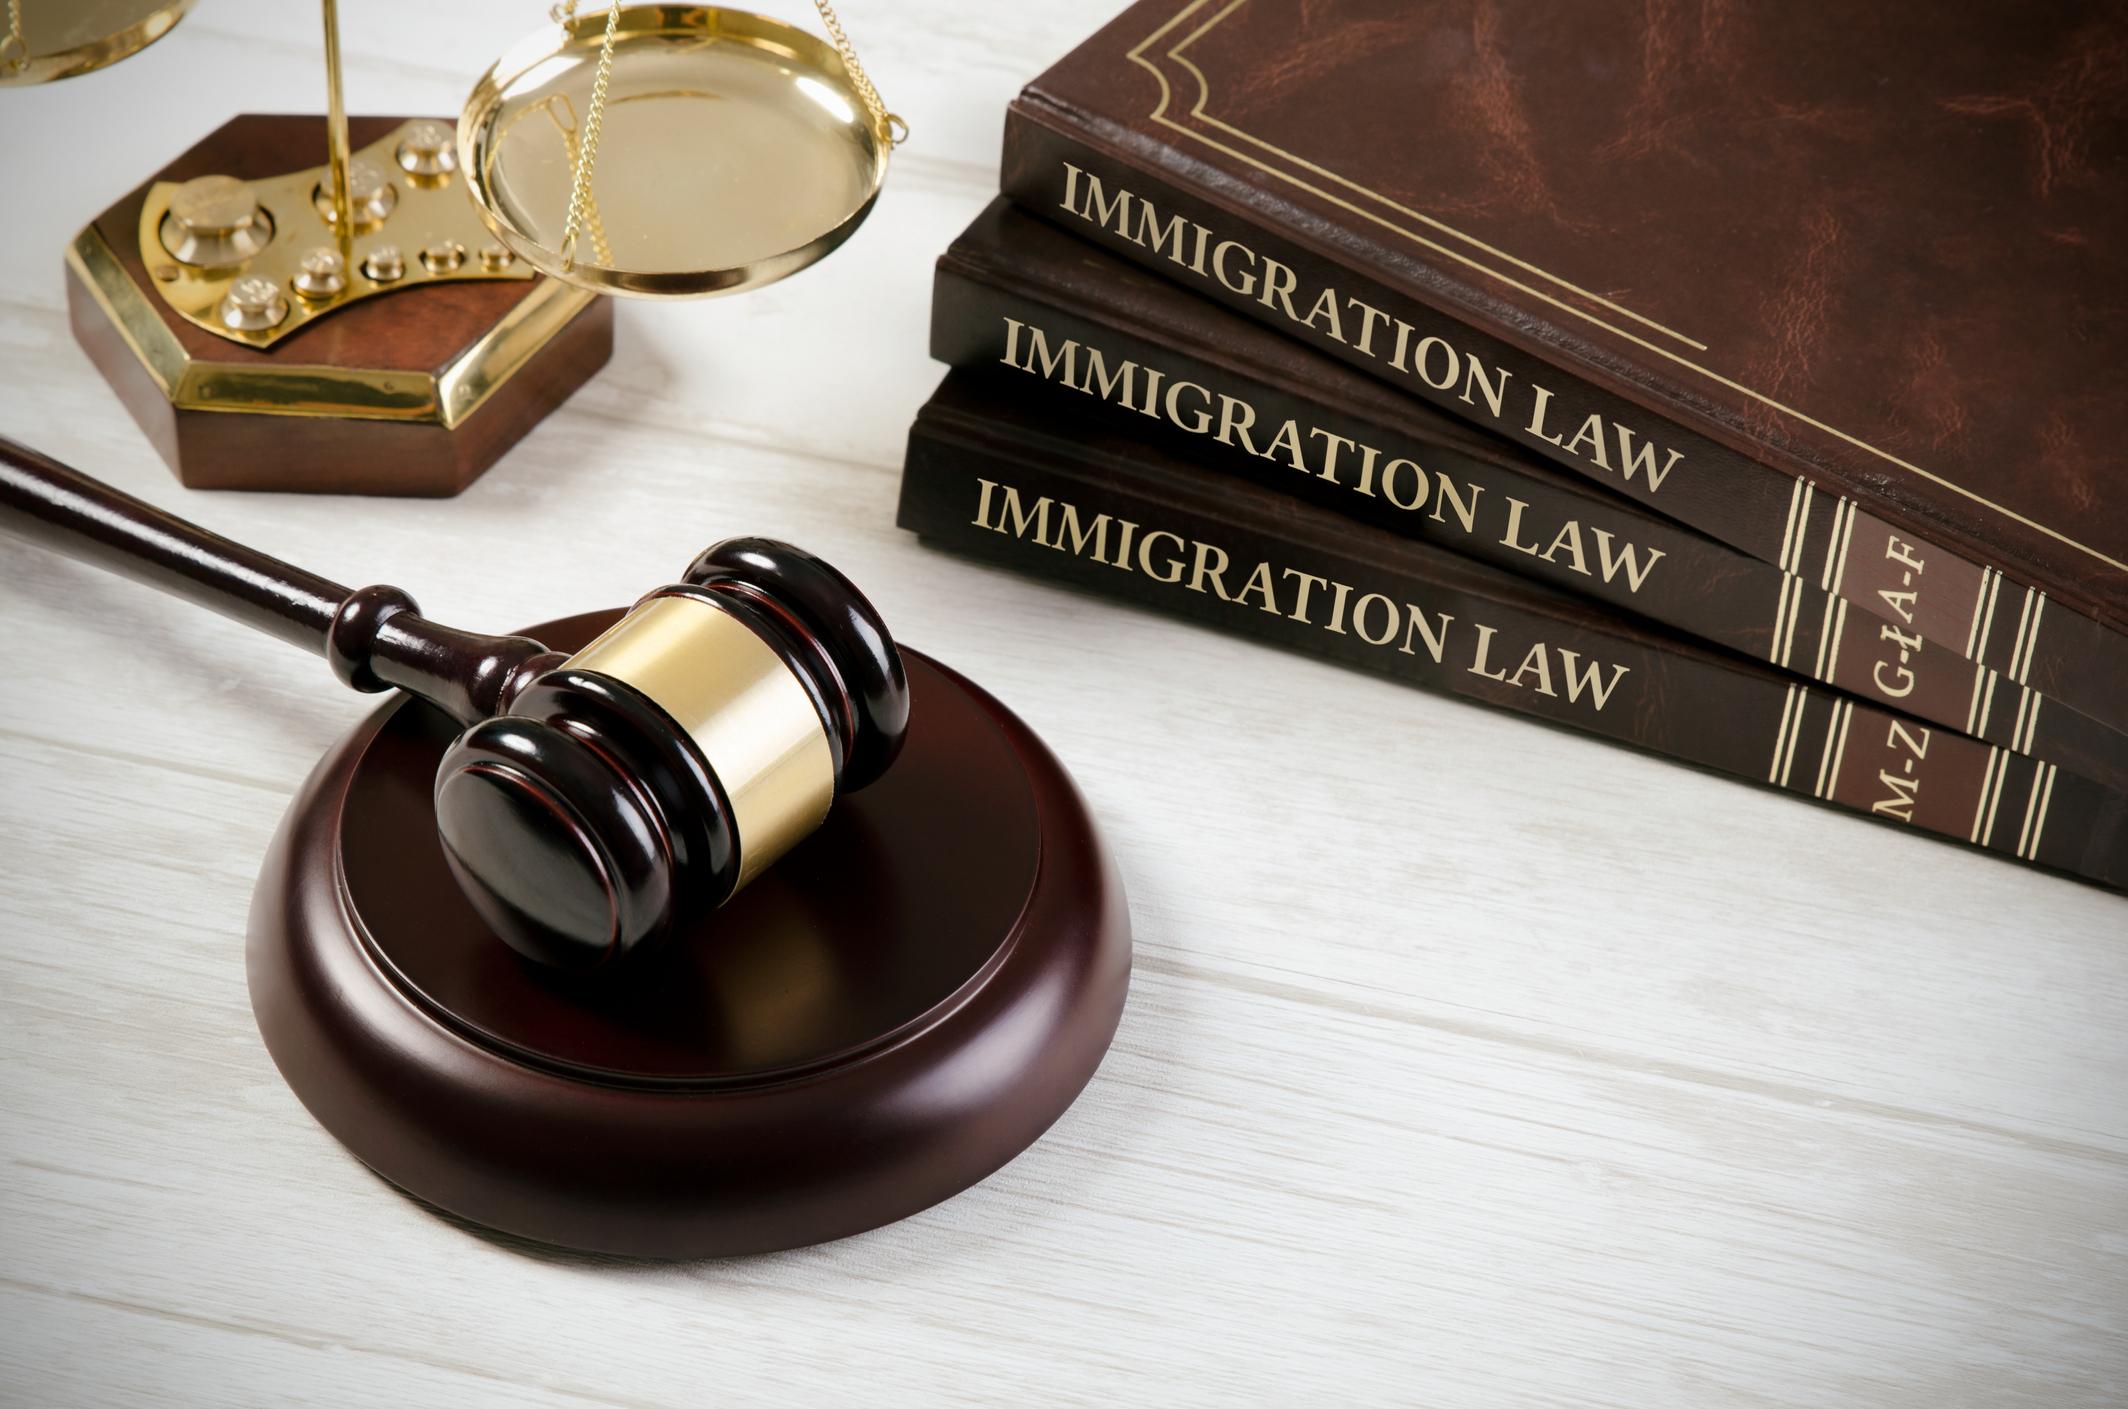 gavel and books that say Immigration Court